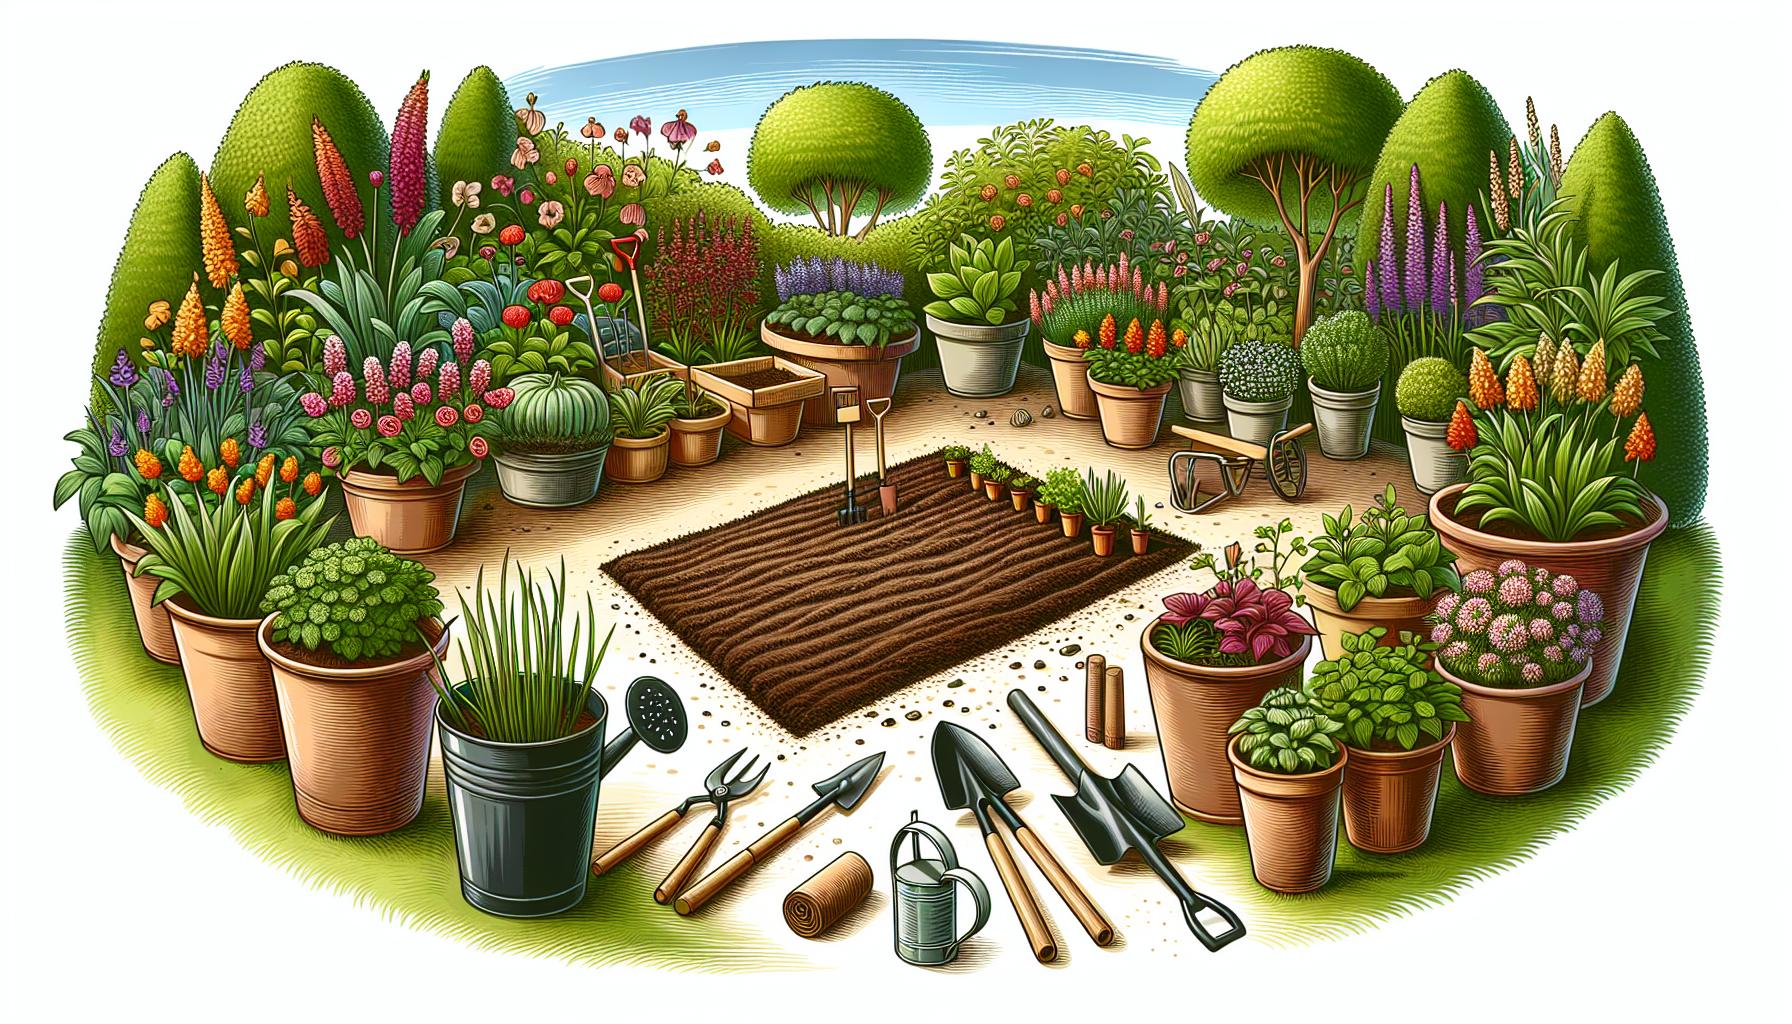 Garden Tools and Plants Illustration